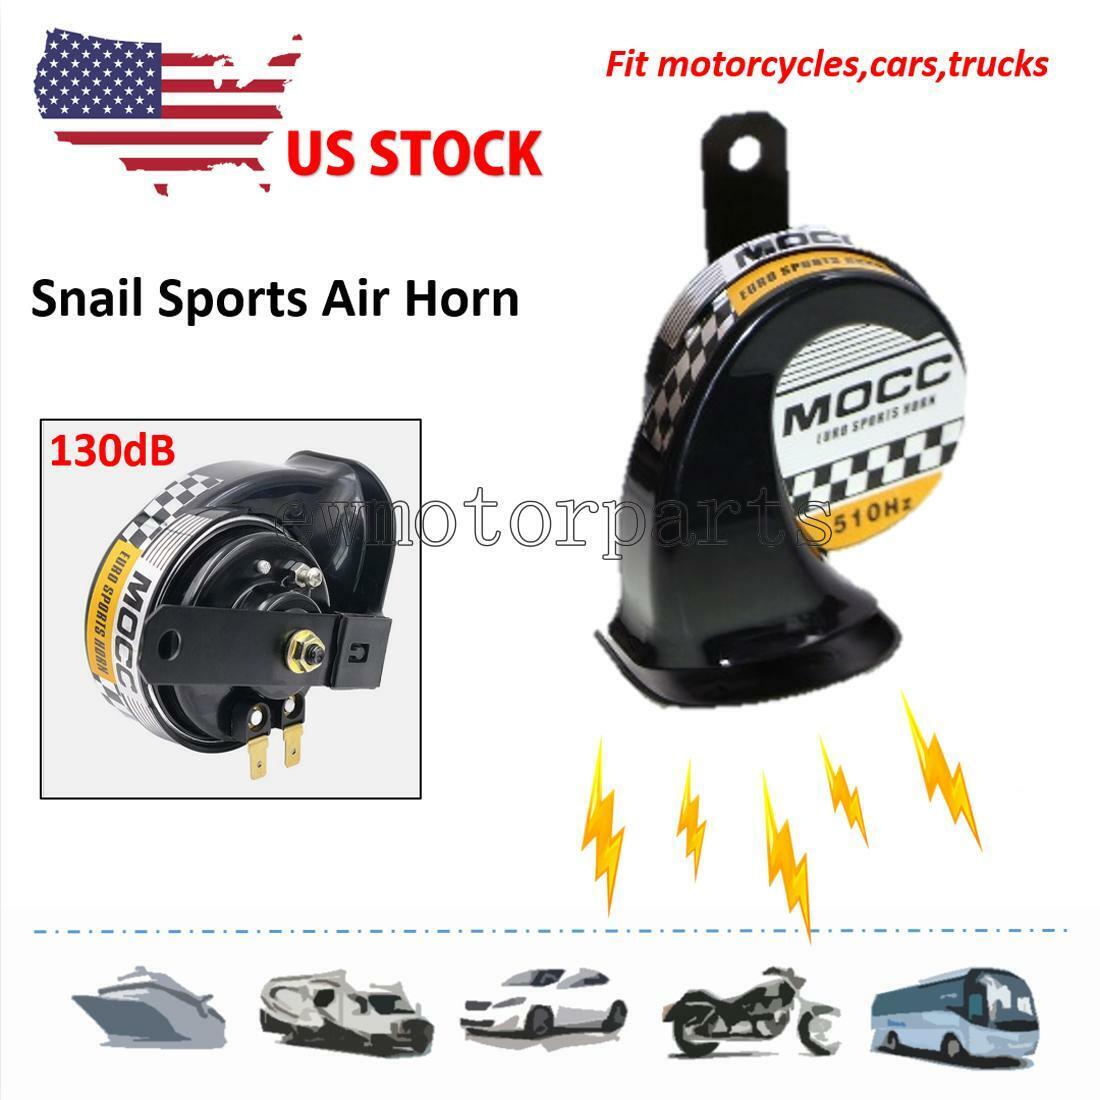 Black Motorcycle Car Truck Loud Horn For Harley Dyna Softail Sportster Touring